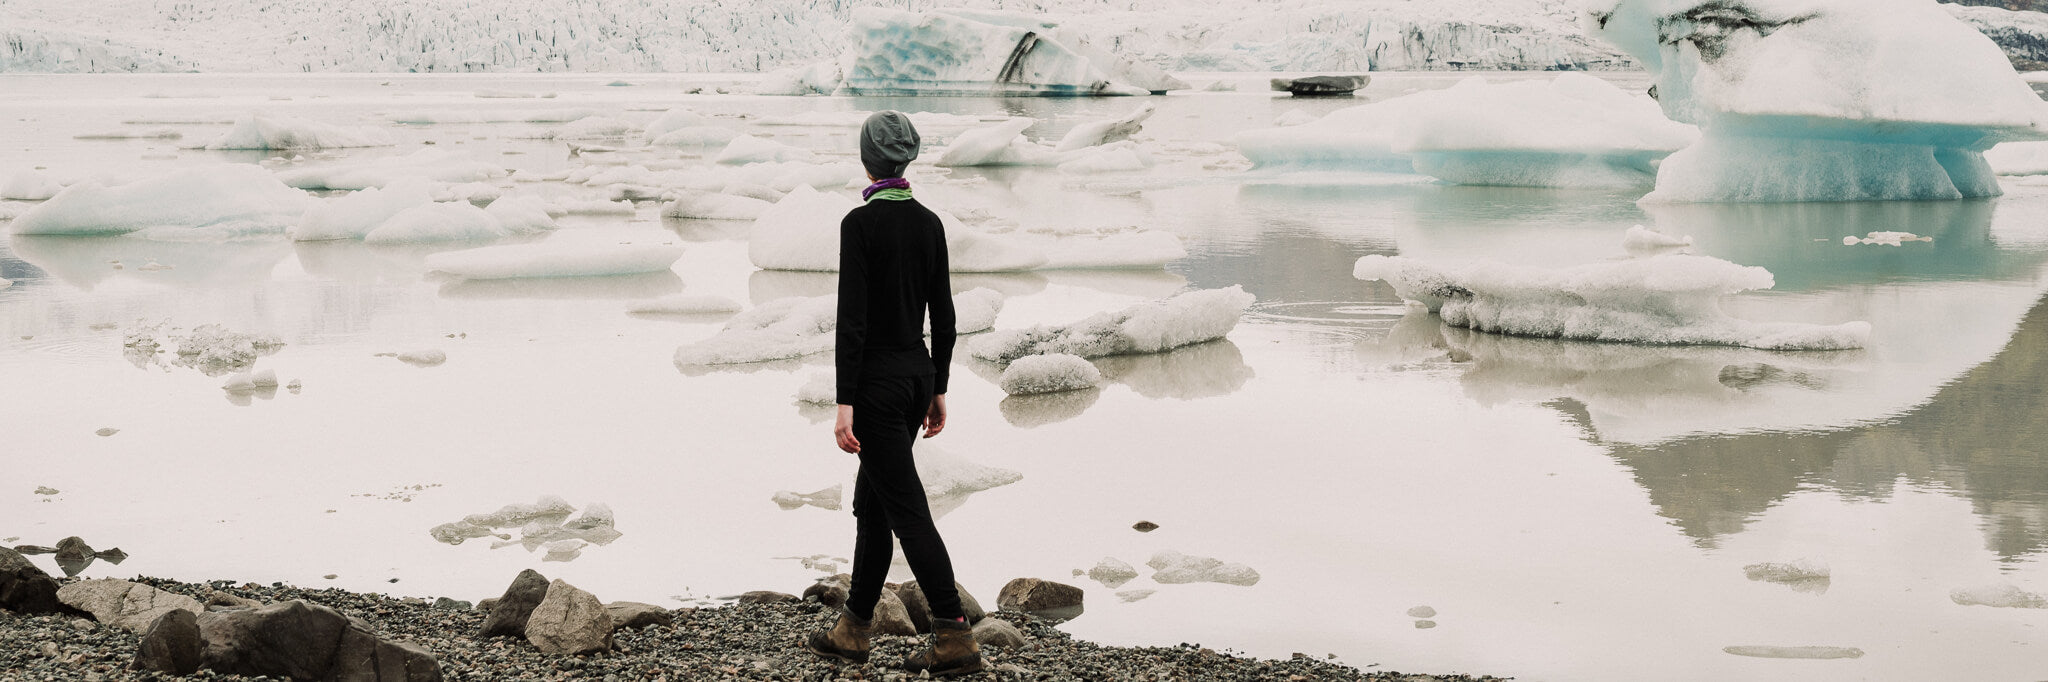 A-woman-with-thermal-shirt-and-pants-walking-near-the-lake-with-icebergs